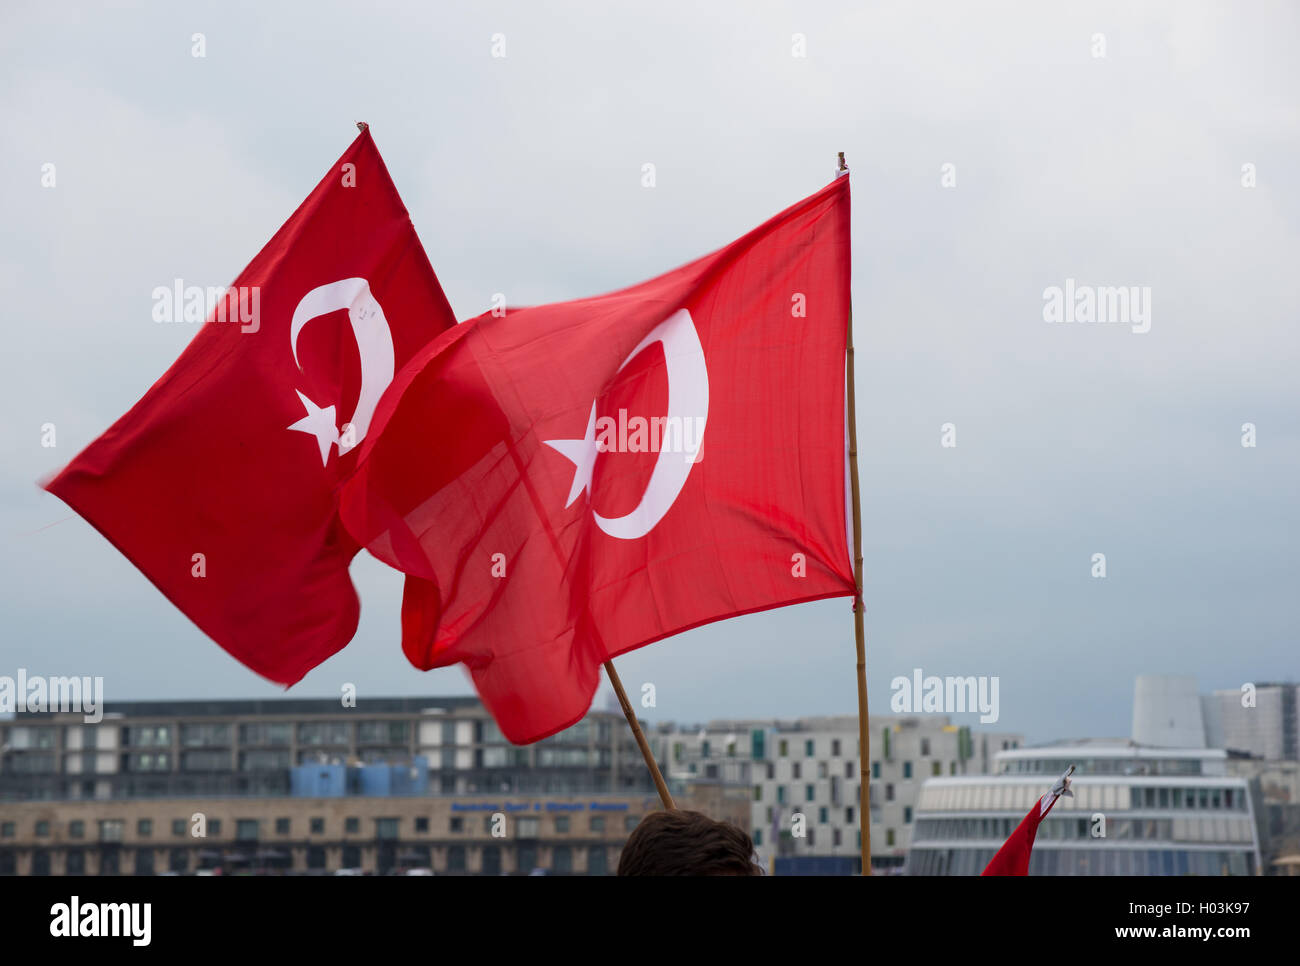 Demonstration in Cologne against coup in turkey Stock Photo